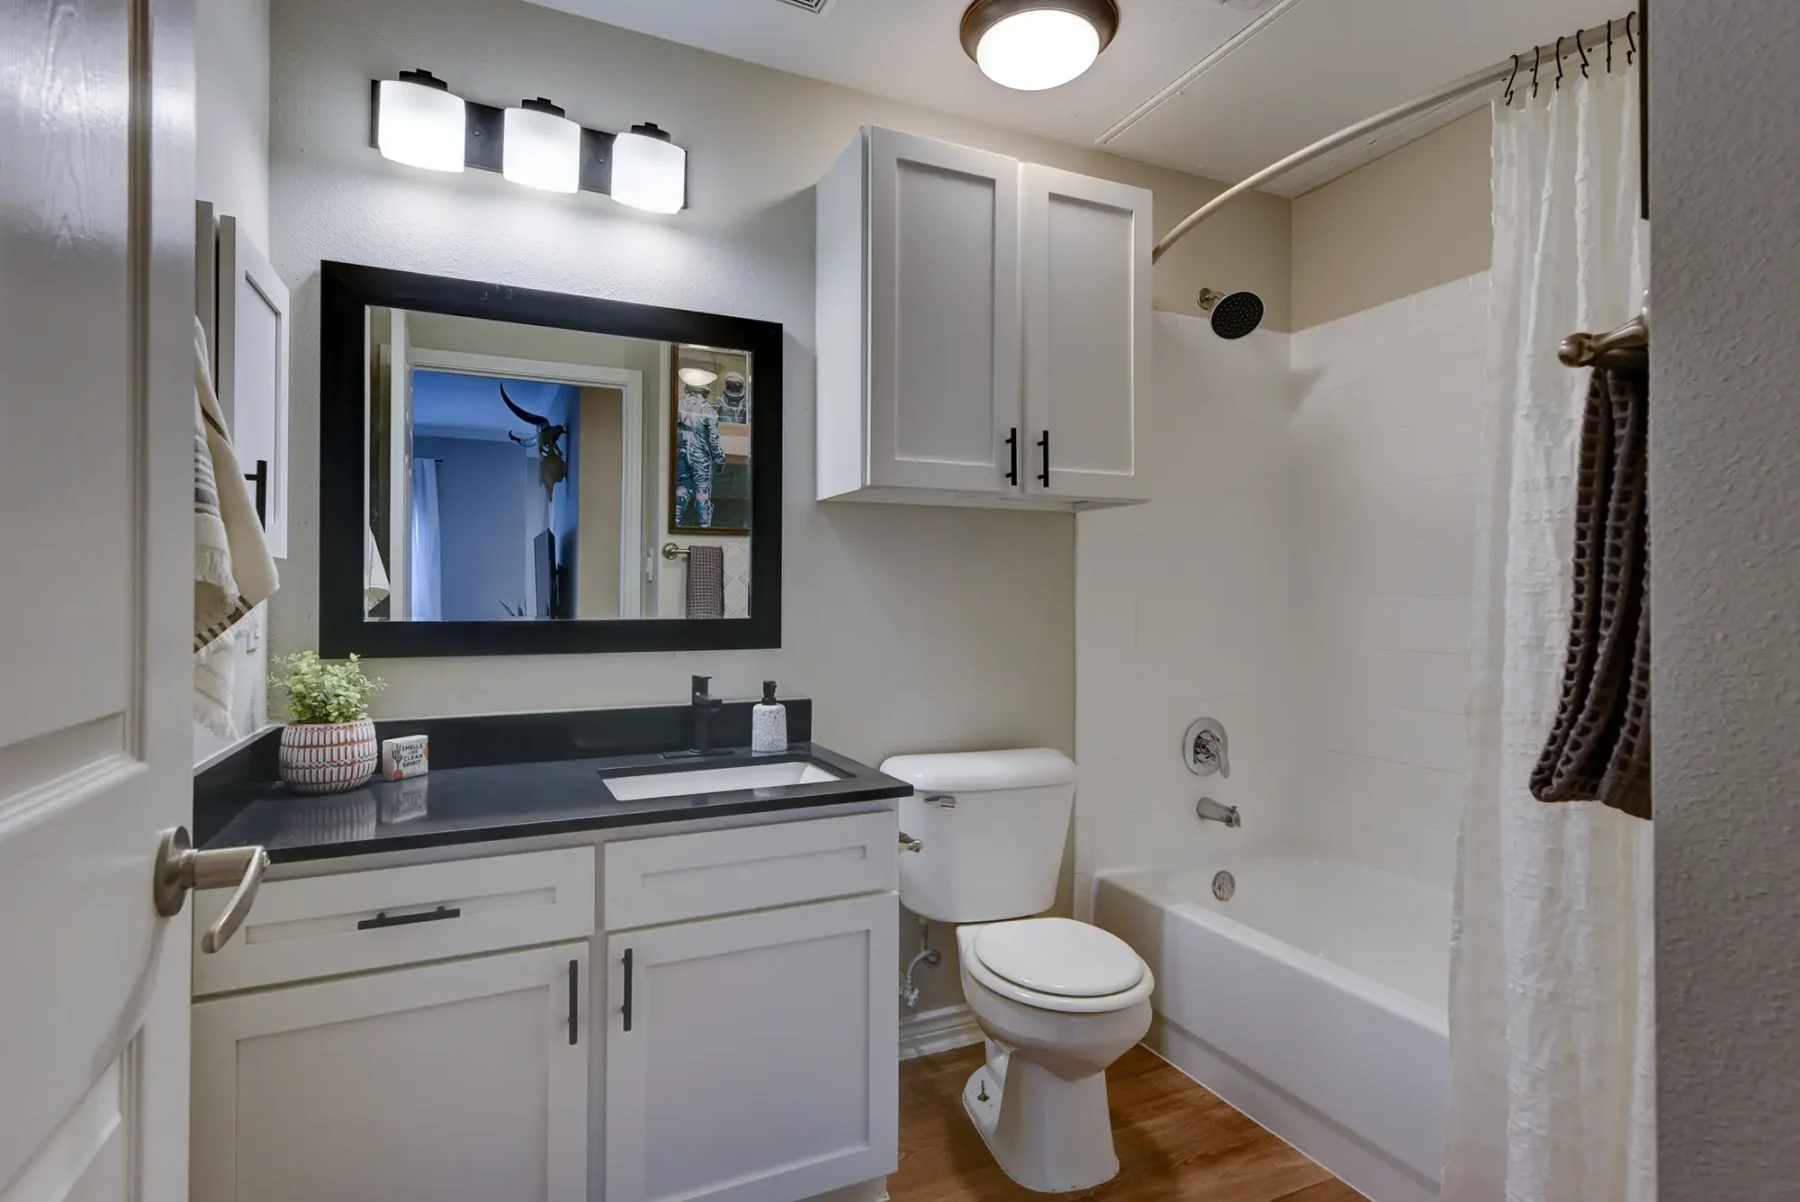 Bathroom with combined shower and tub, and vanity with cabinets and drawer